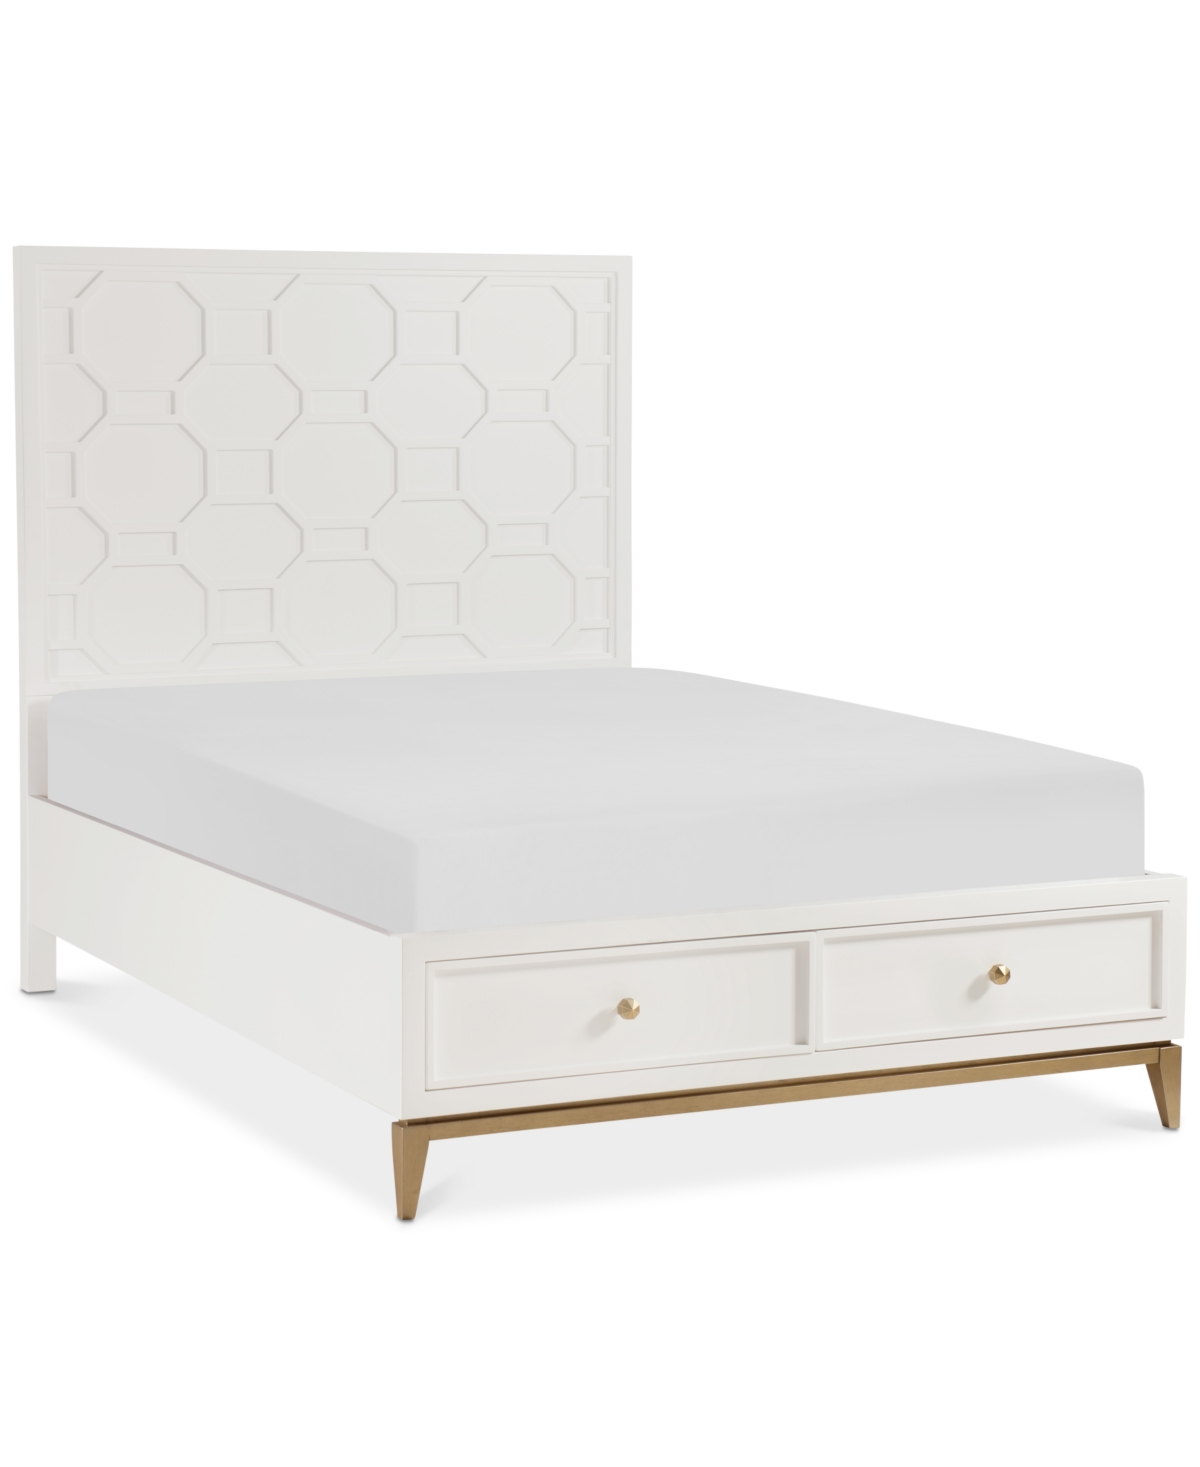 Macy's Rachael Ray Chelsea Full Storage Bed In No Color